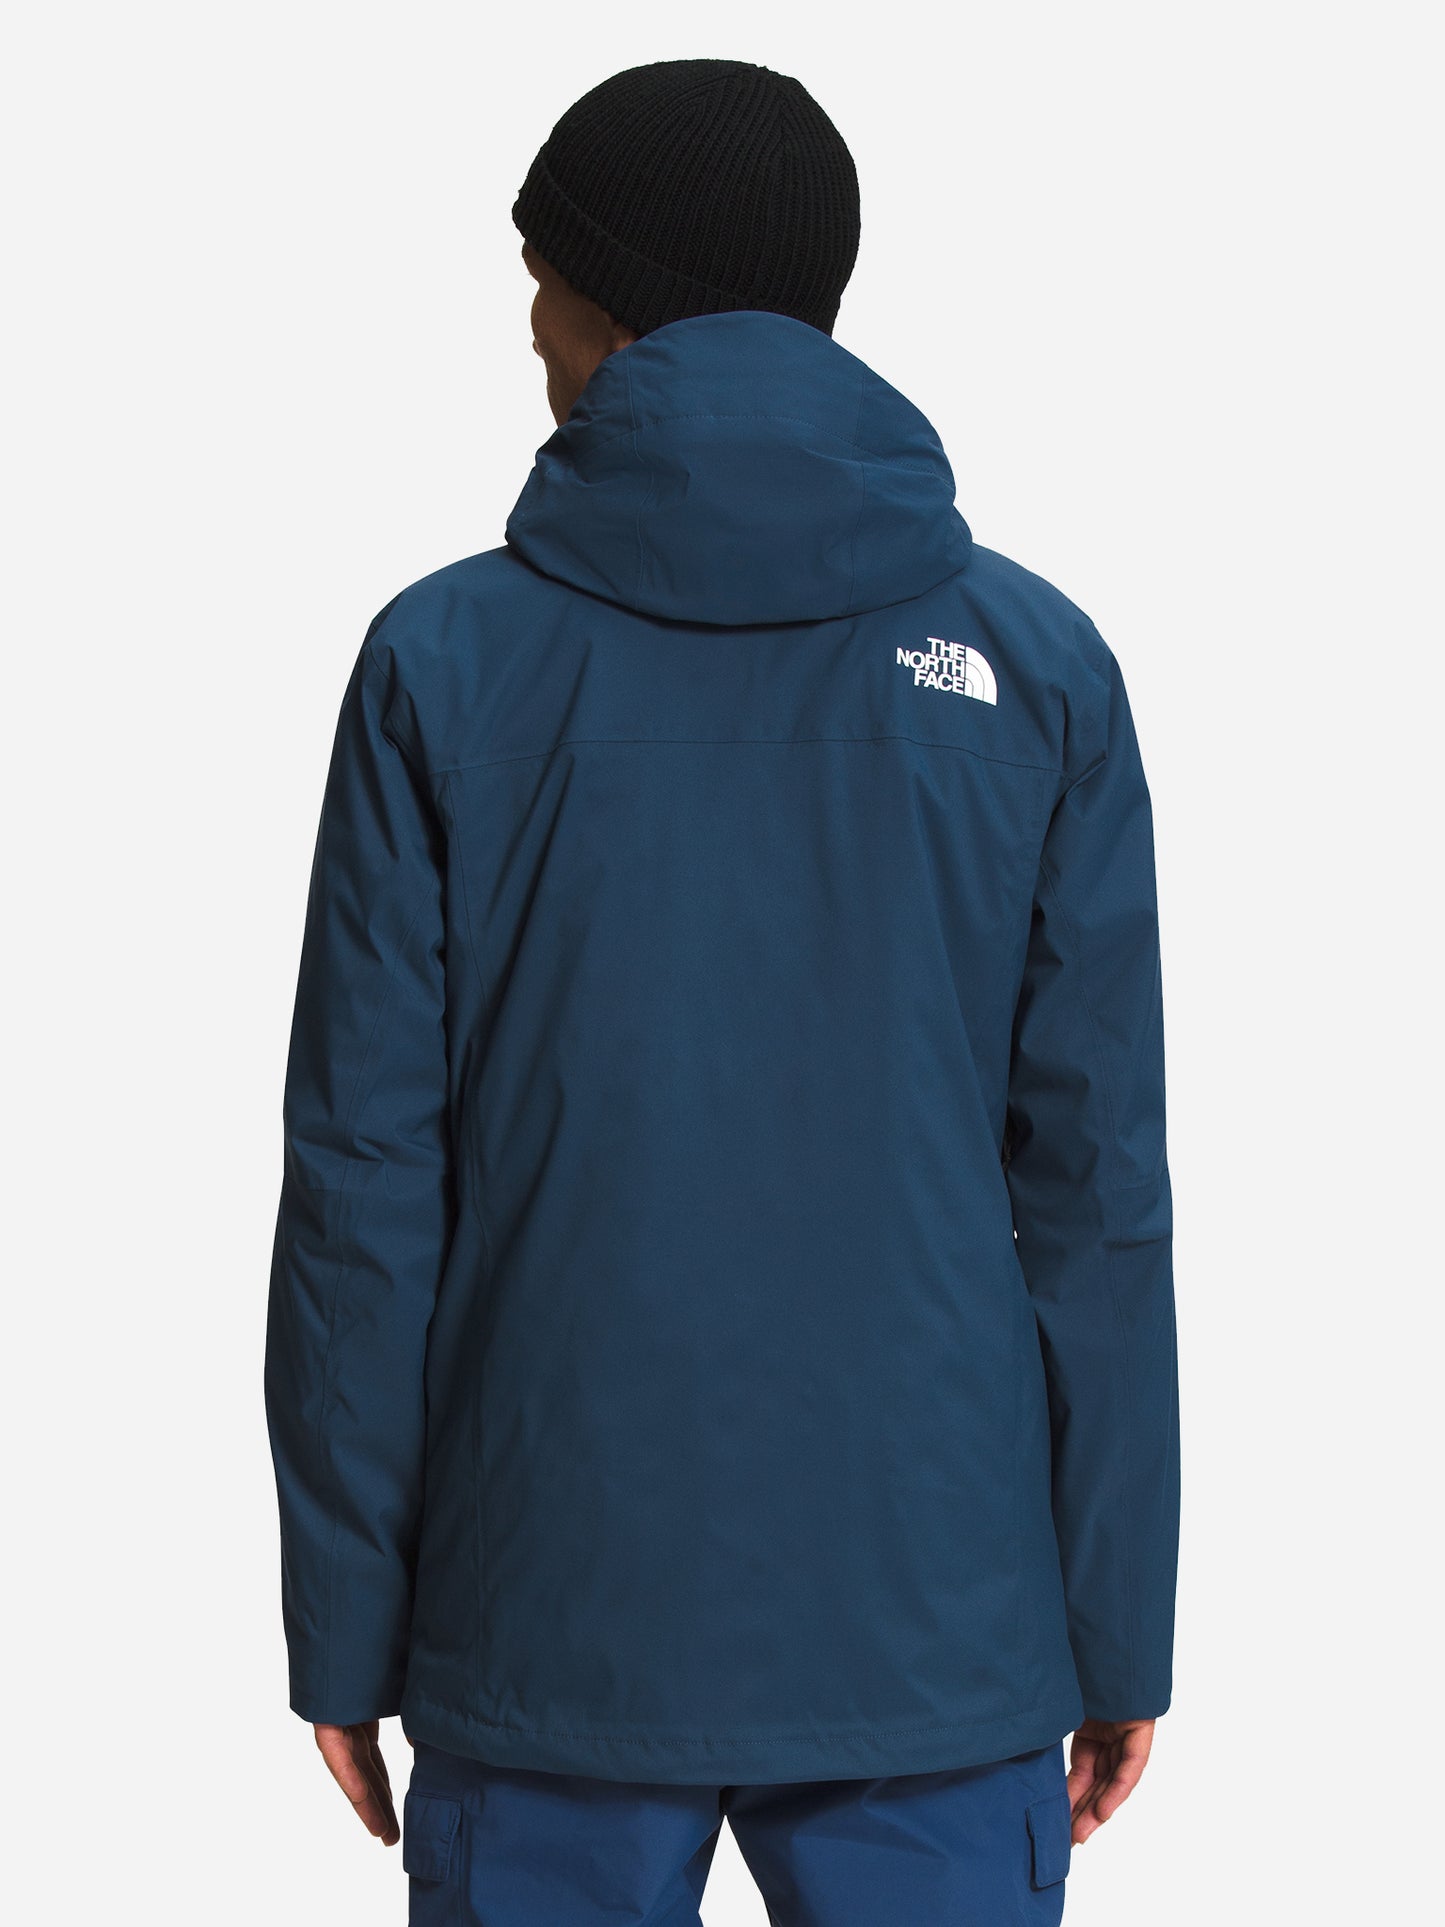 The North Face Men's ThermoBall Eco Snow Triclimate – saintbernard.com